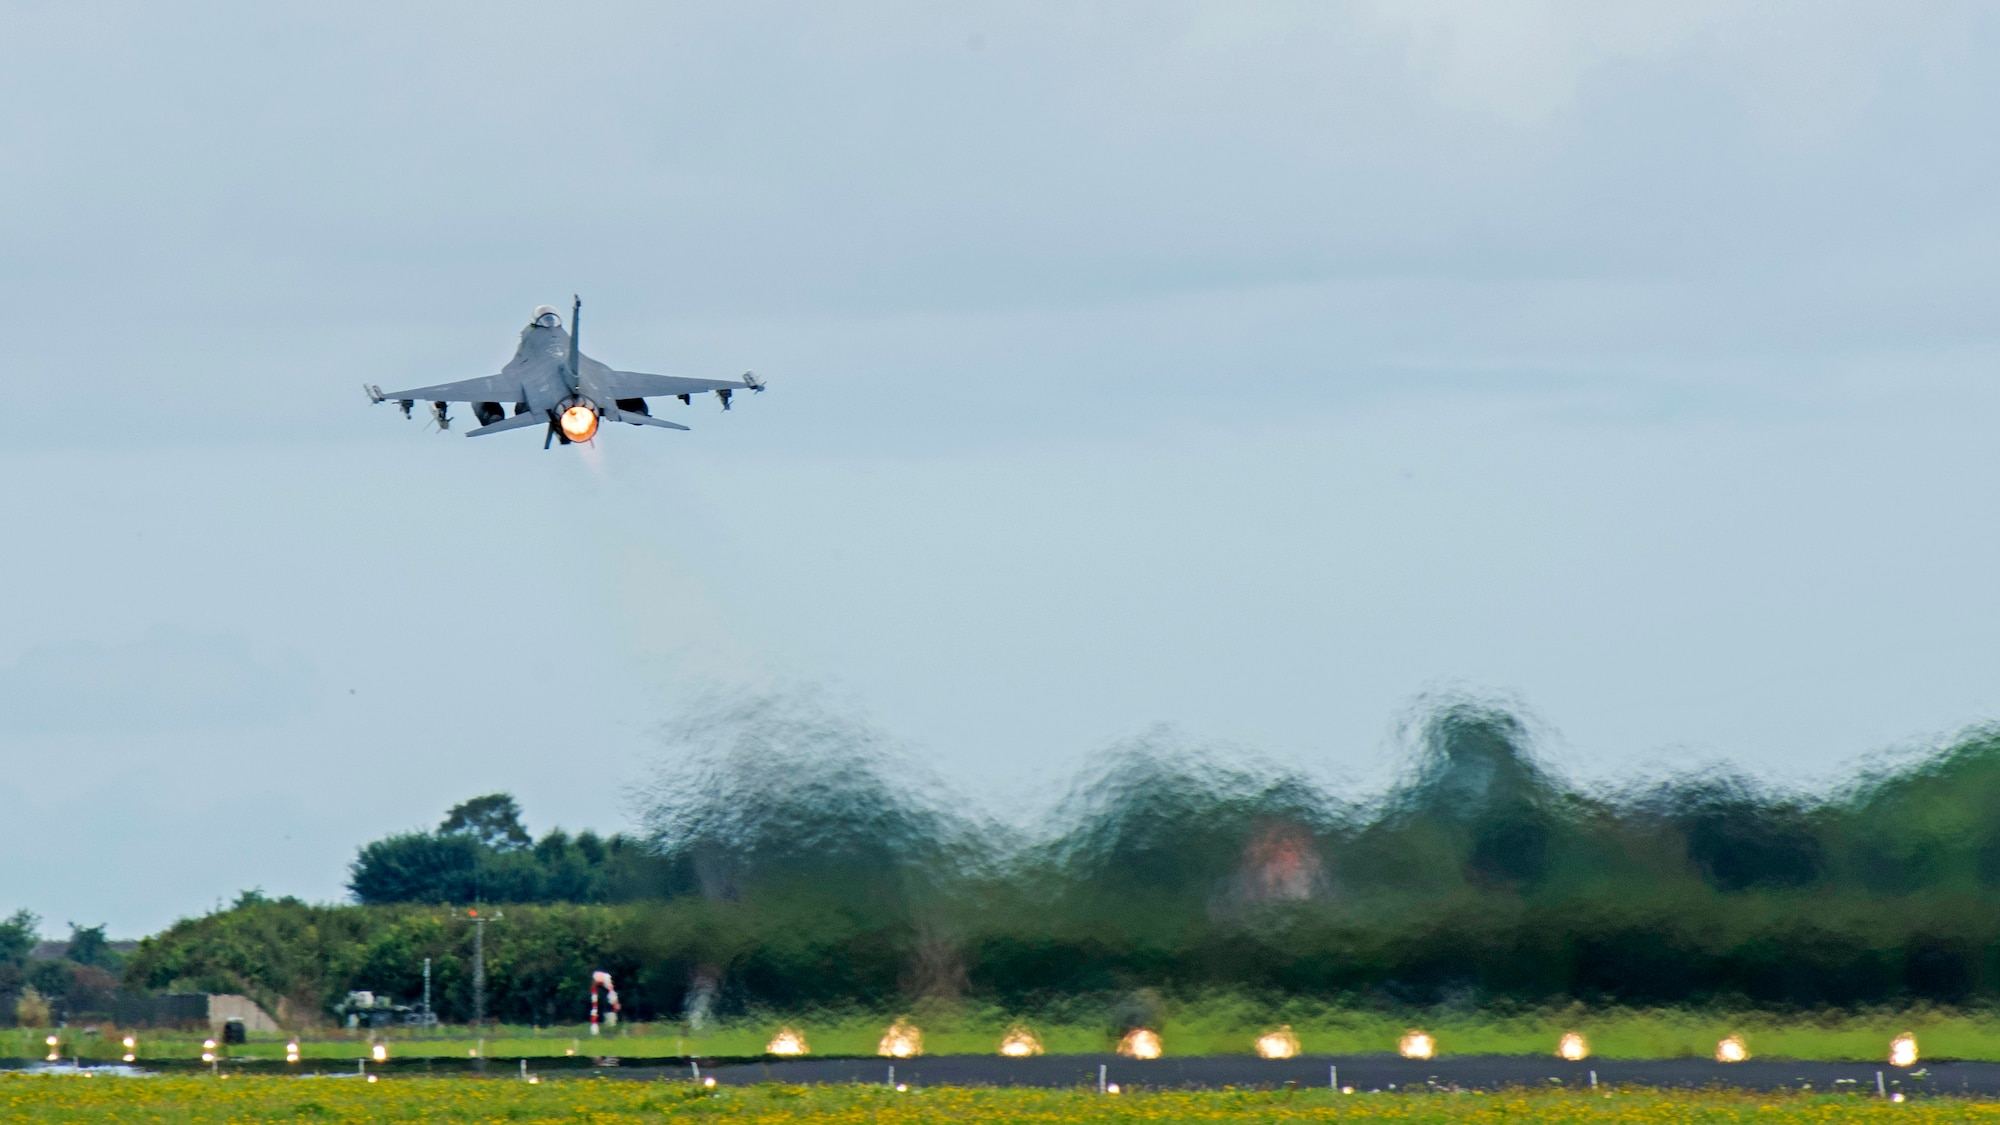 A U.S. Air Force F-16 Fighting Falcon assigned to the 480th Fighter Squadron, 52nd Fighter Wing, Spangdahlem Air Base, Germany, takes off at Leeuwarden Air Base, Netherlands, Sept. 13, 2021. The 480th FS integrated with coalition F-16 and F-35 Lightning II aircraft during the Suppression of Enemy Air Defense phase of a weapons instructor course that included pilots from Belgium, the Netherlands and Norway. (U.S. Air Force photo by Tech. Sgt. Anthony Plyler)